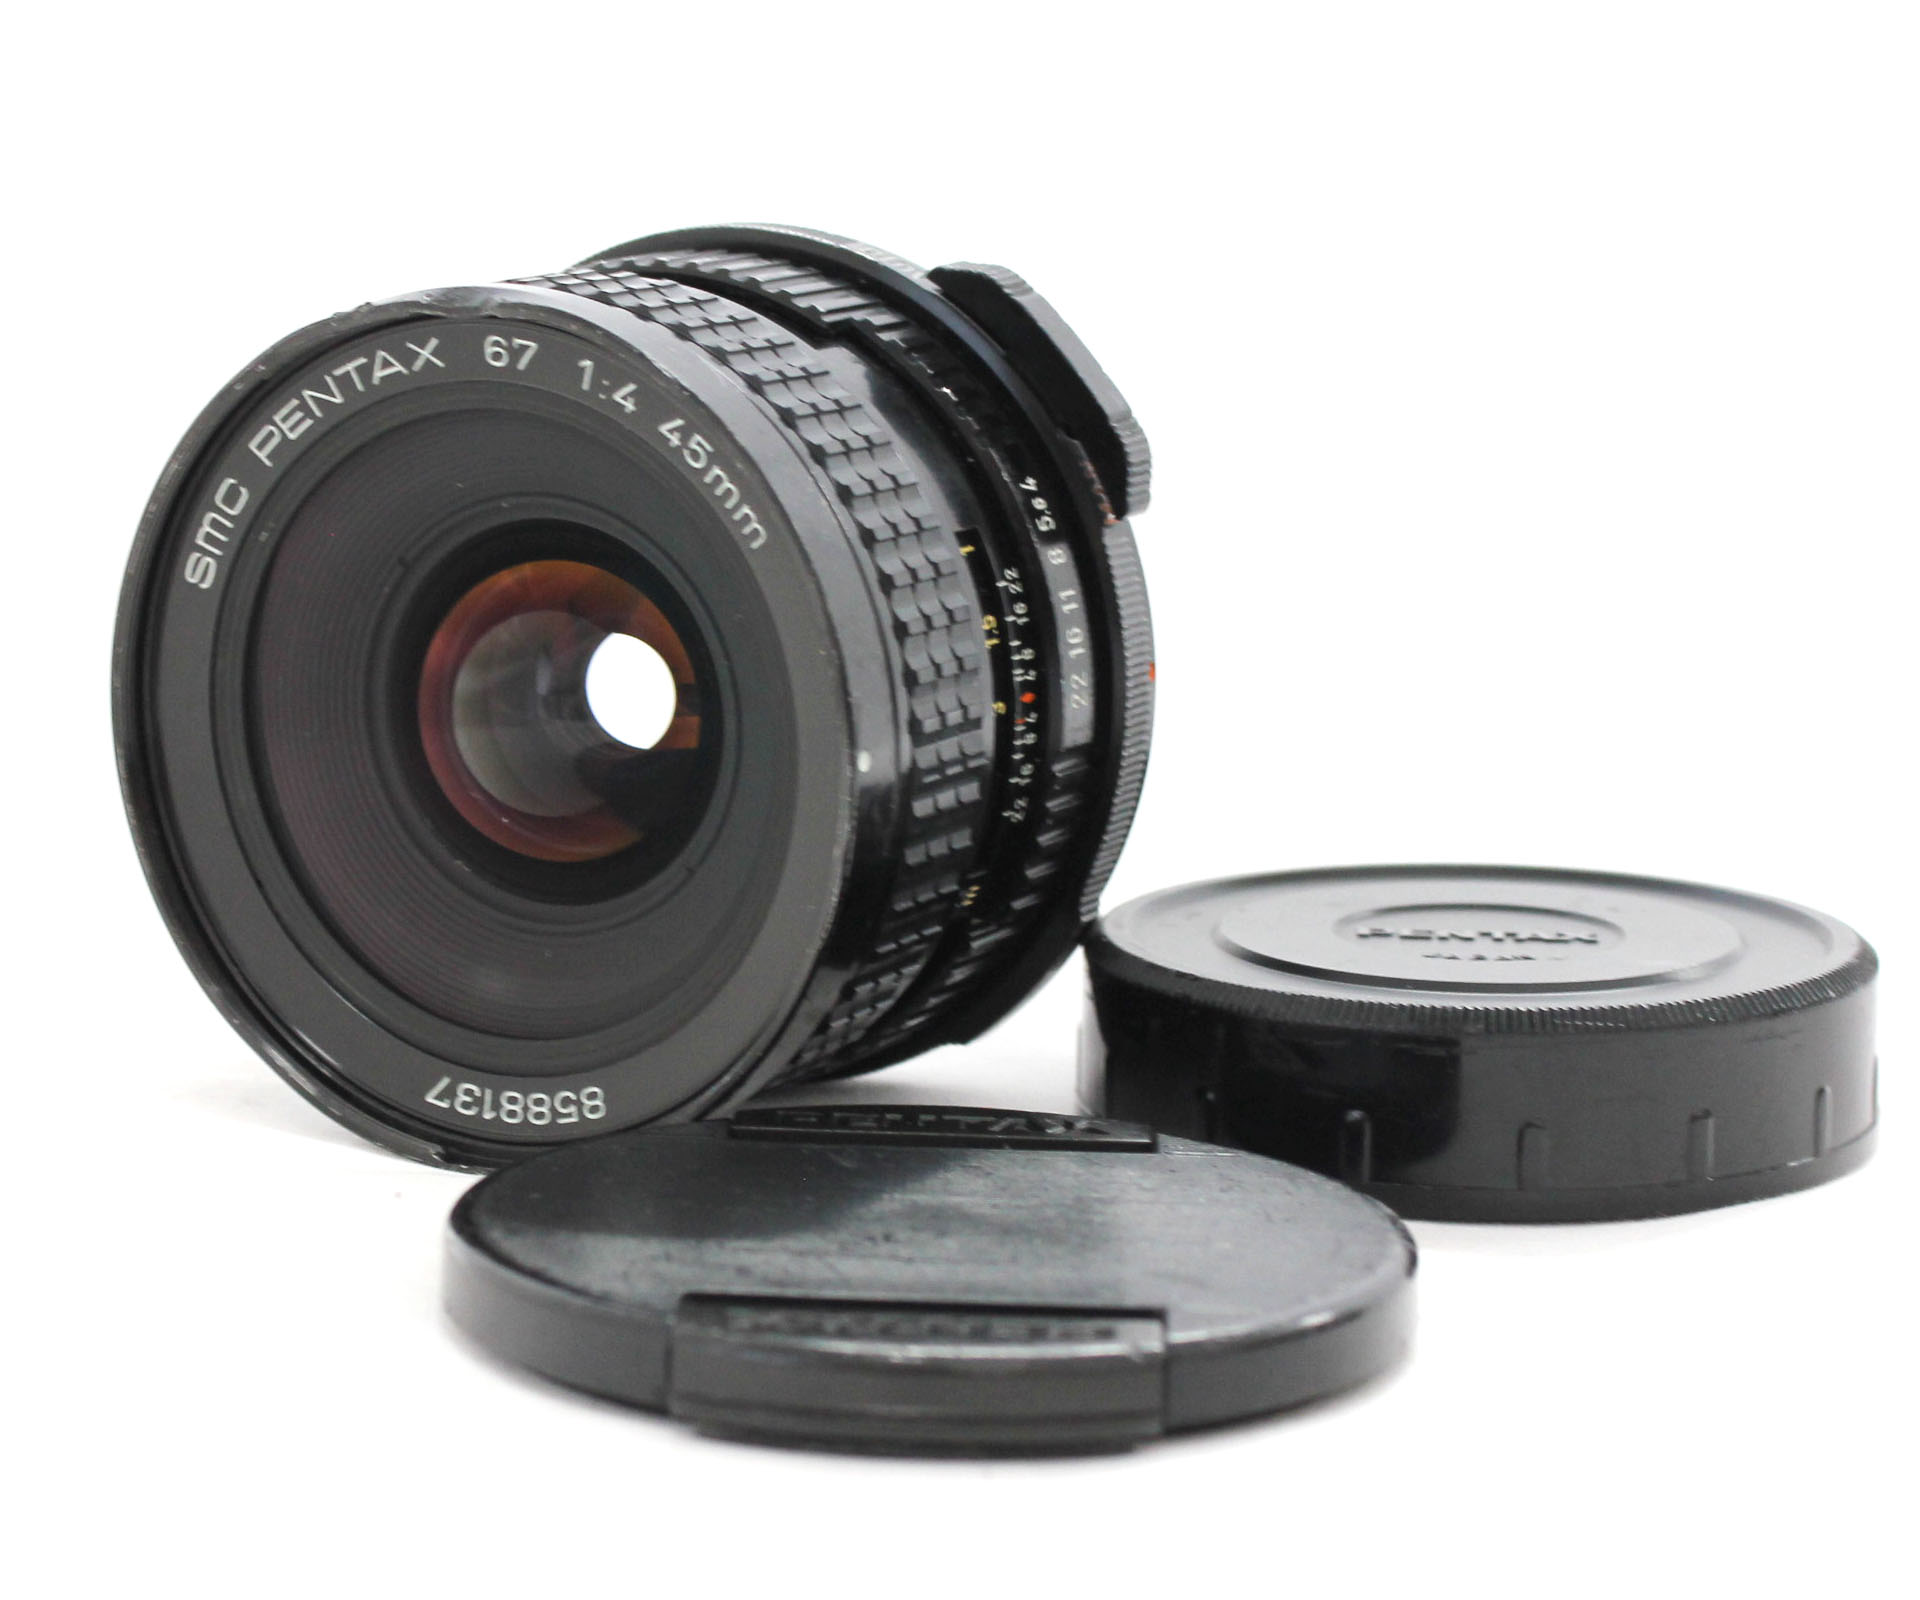 Japan Used Camera Shop | SMC Pentax 67 45mm F/4 for Pentax 67 67II Wide Angle MF Lens from Japan